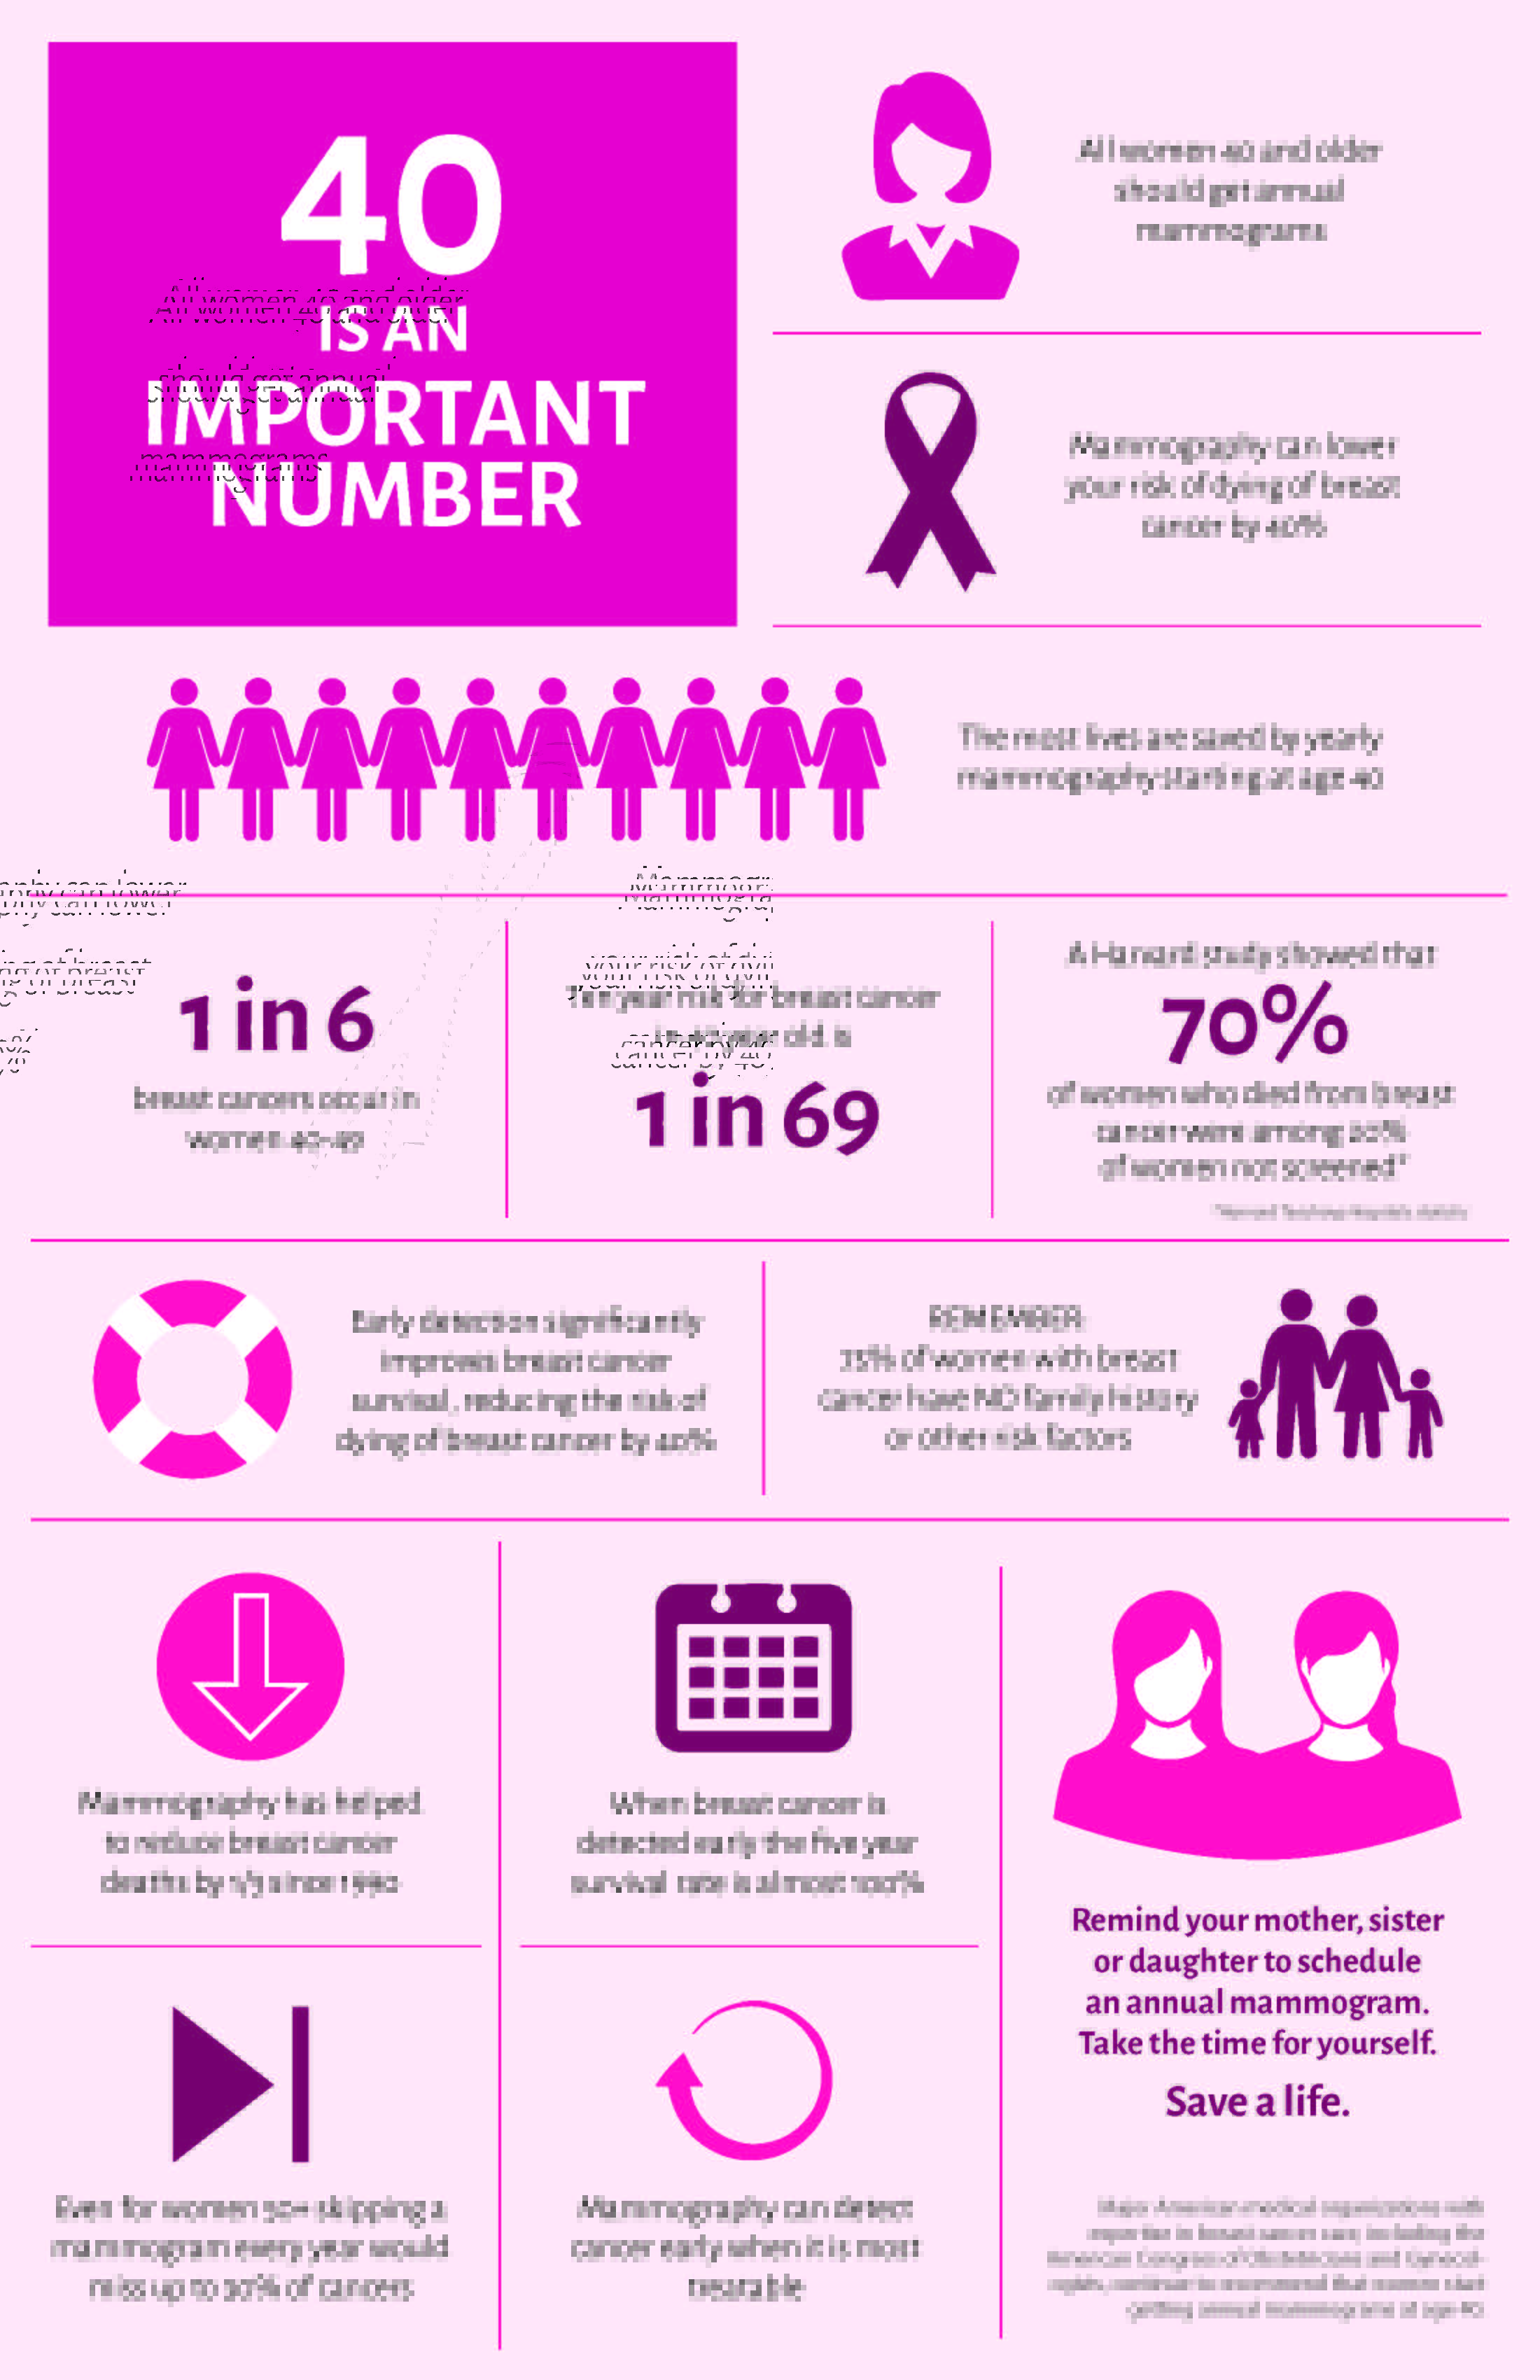 Breast Cancer Stigma Among Indonesian Women: A Case Study